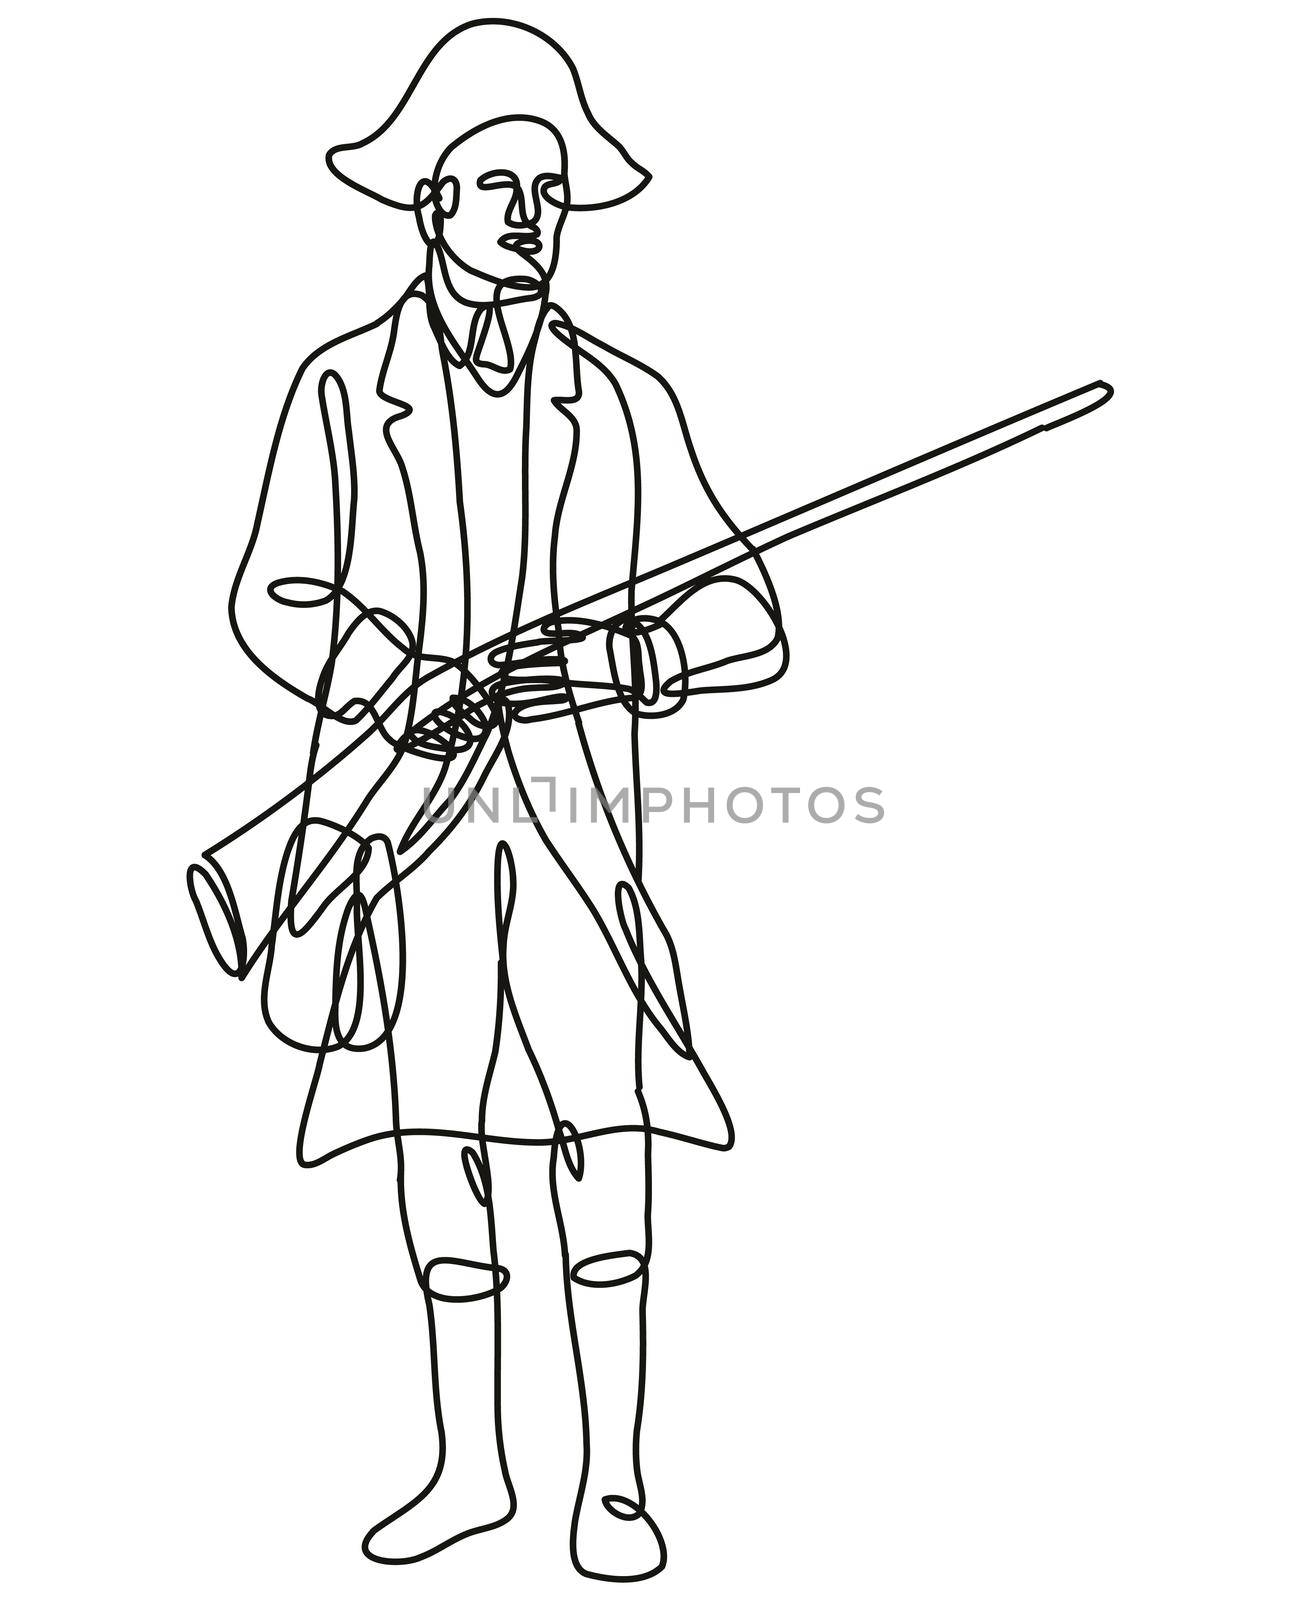 Continuous line drawing illustration of an American Patriot Revolutionary Soldier with Musket Rifle Front View  done in mono line or doodle style in black and white on isolated background. 